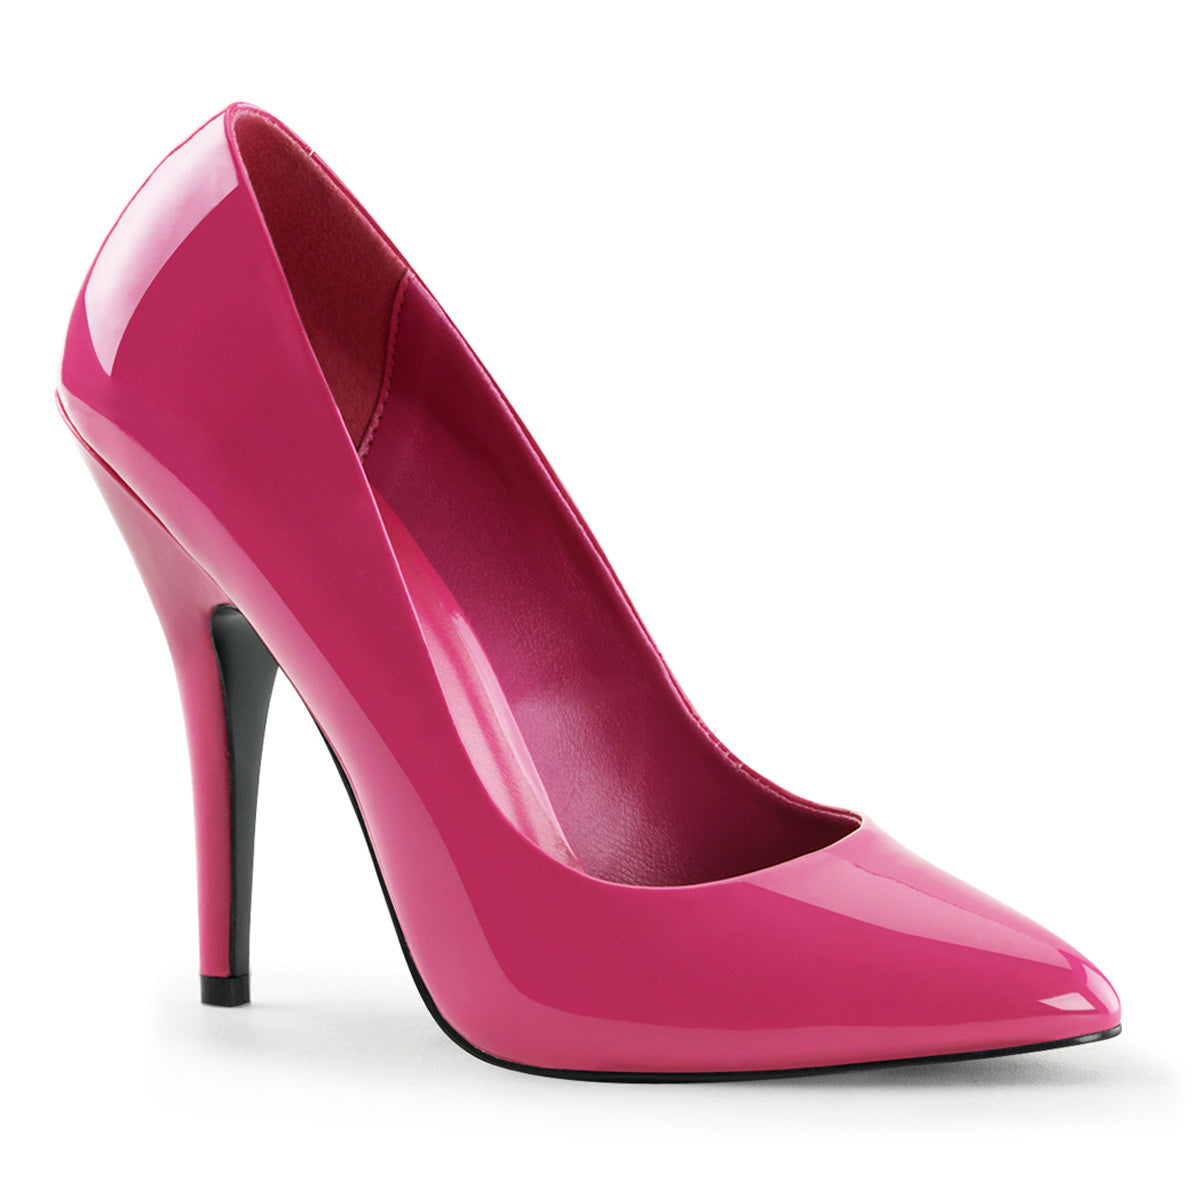 SEDUCE-420 Sexy Shoe 5" Heel Hot Pink Patent Fetish Footwear-Pleaser- Sexy Shoes